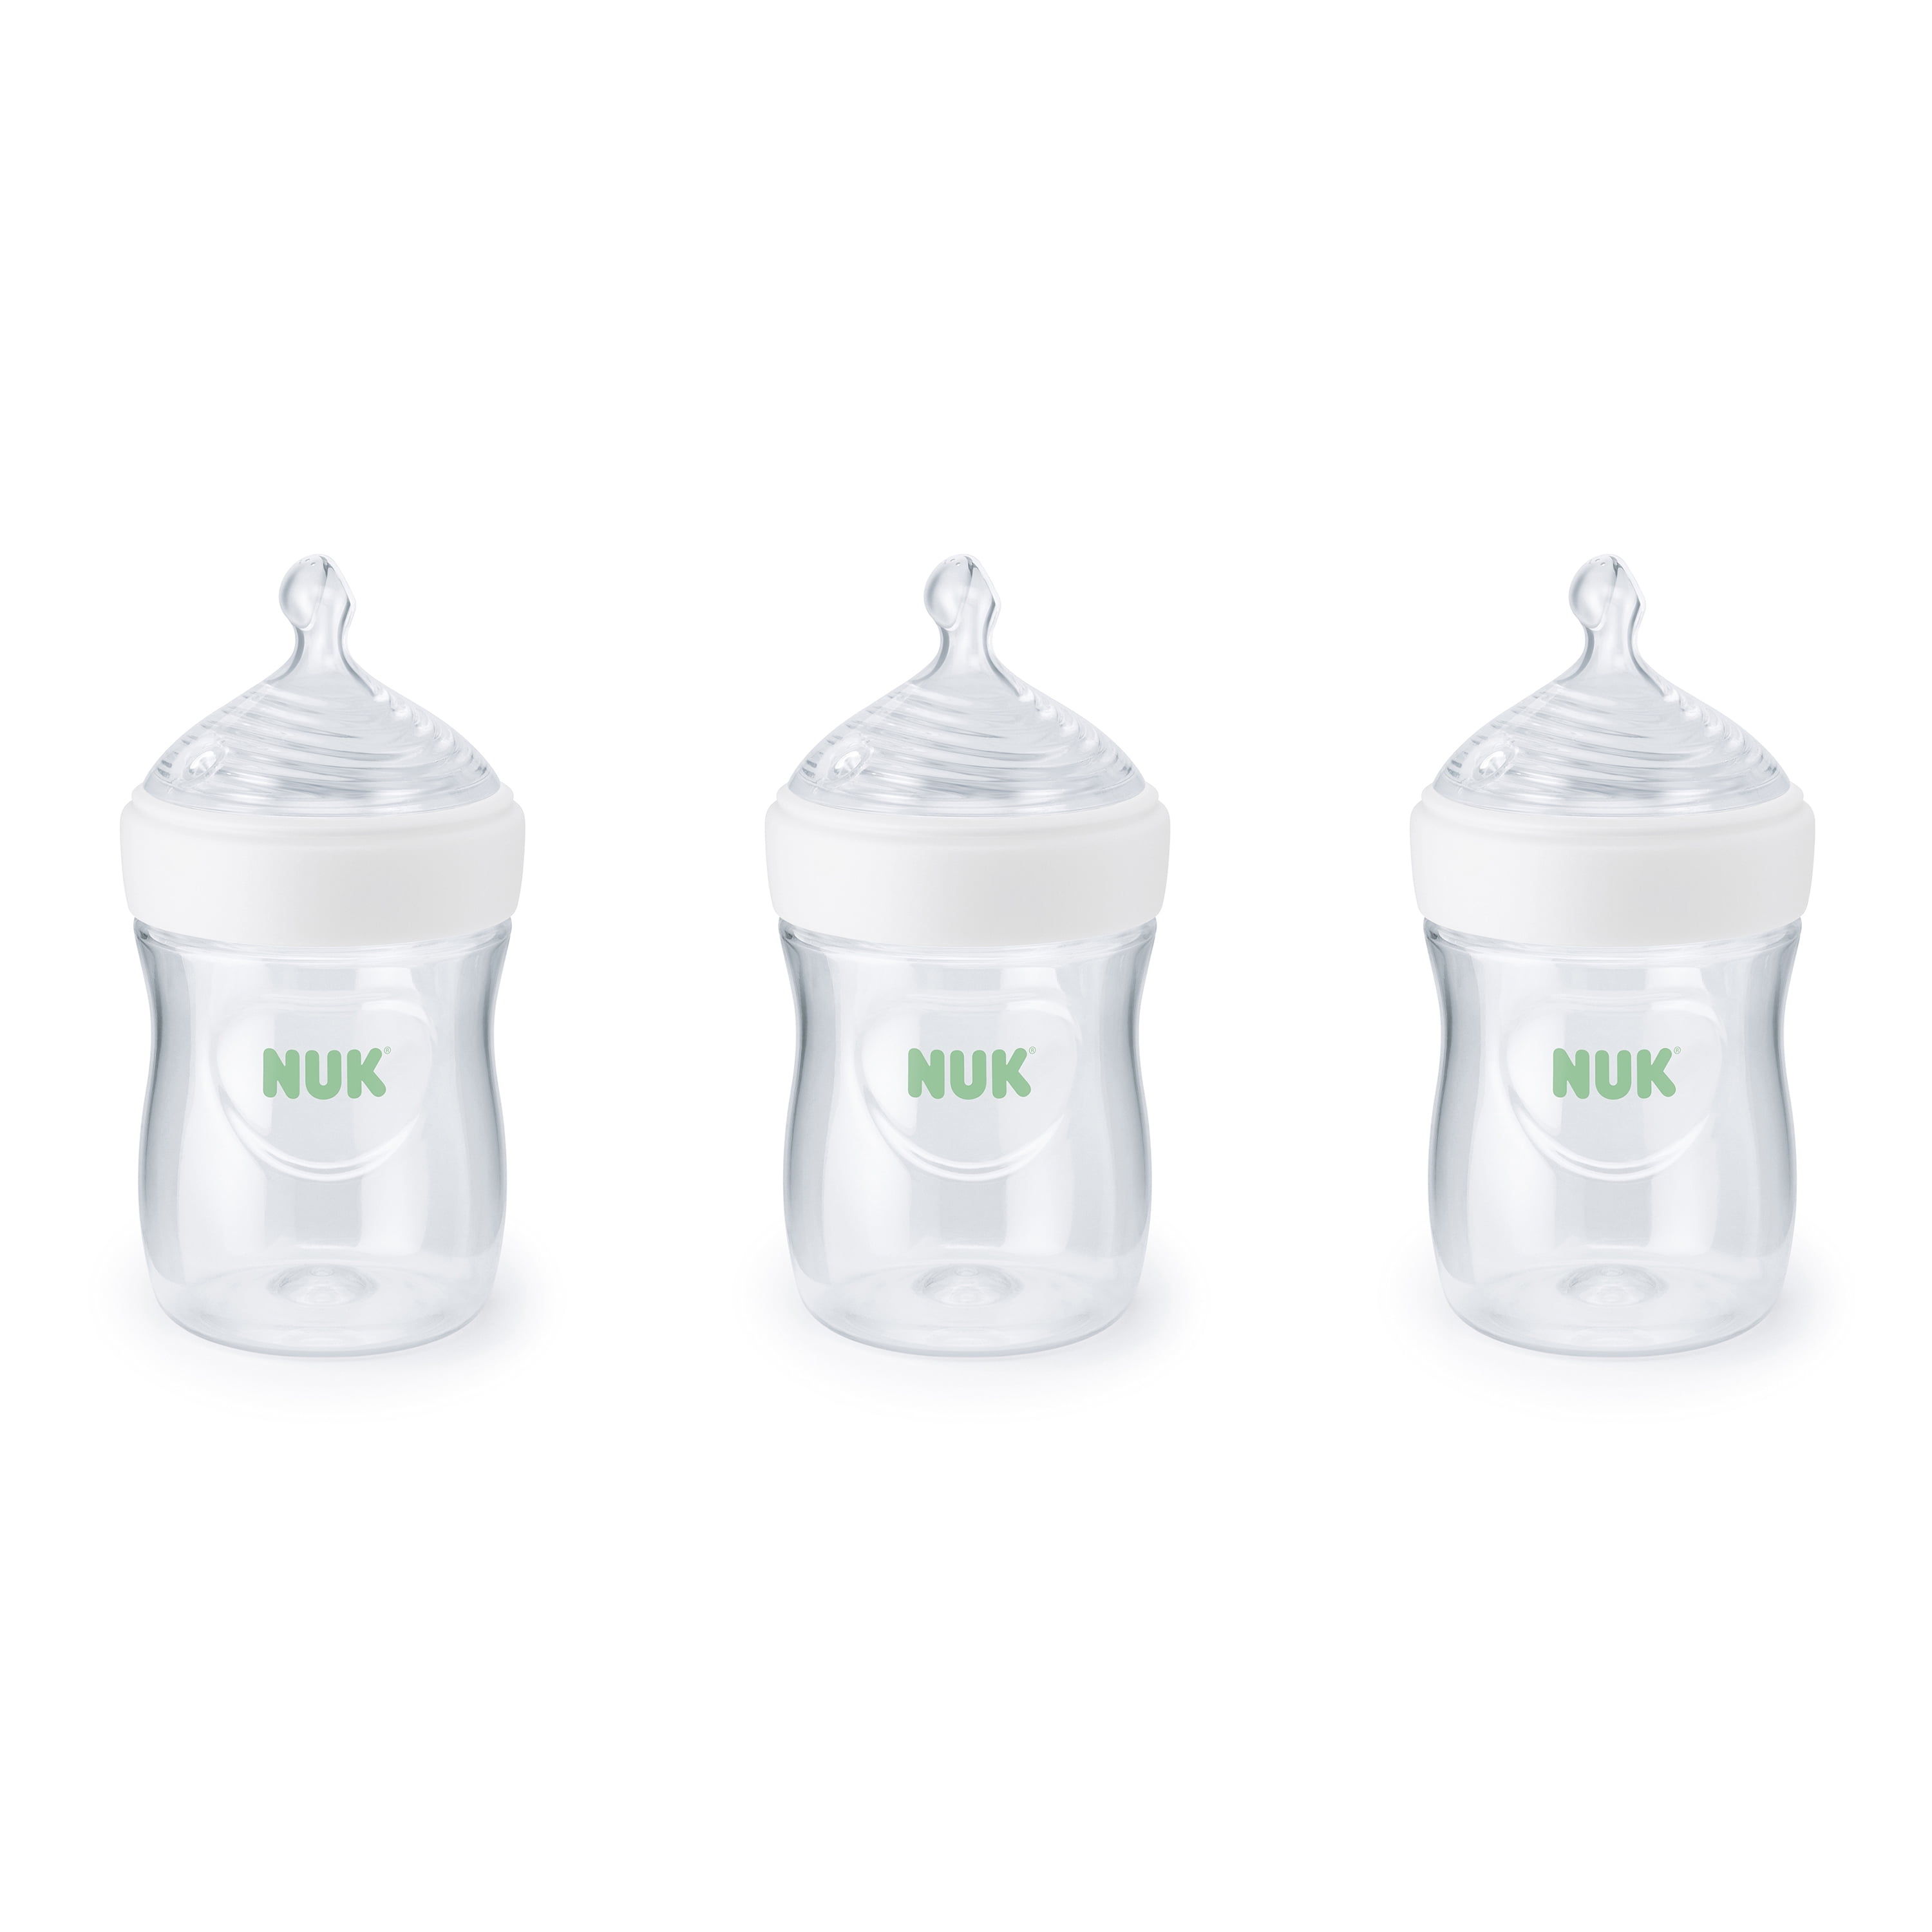 NUK Simply Natural with SafeTemp, 5 oz, 3 Pack, Clear Baby Bottles